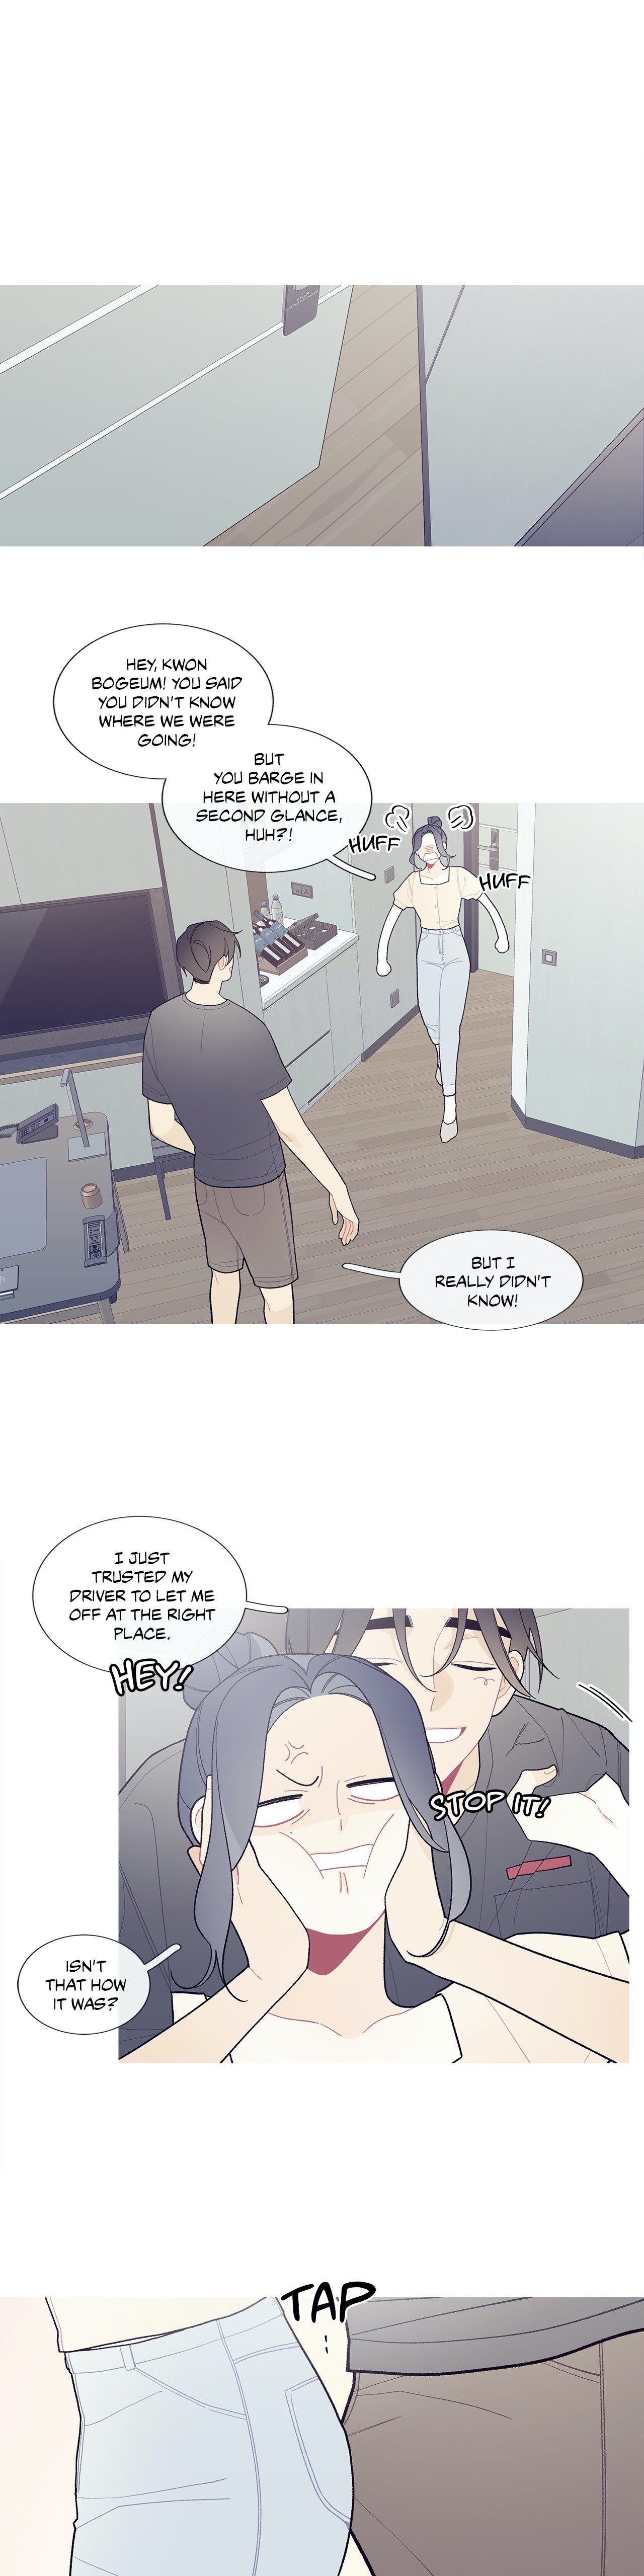 What’s Going On? - Chapter 100 Page 9